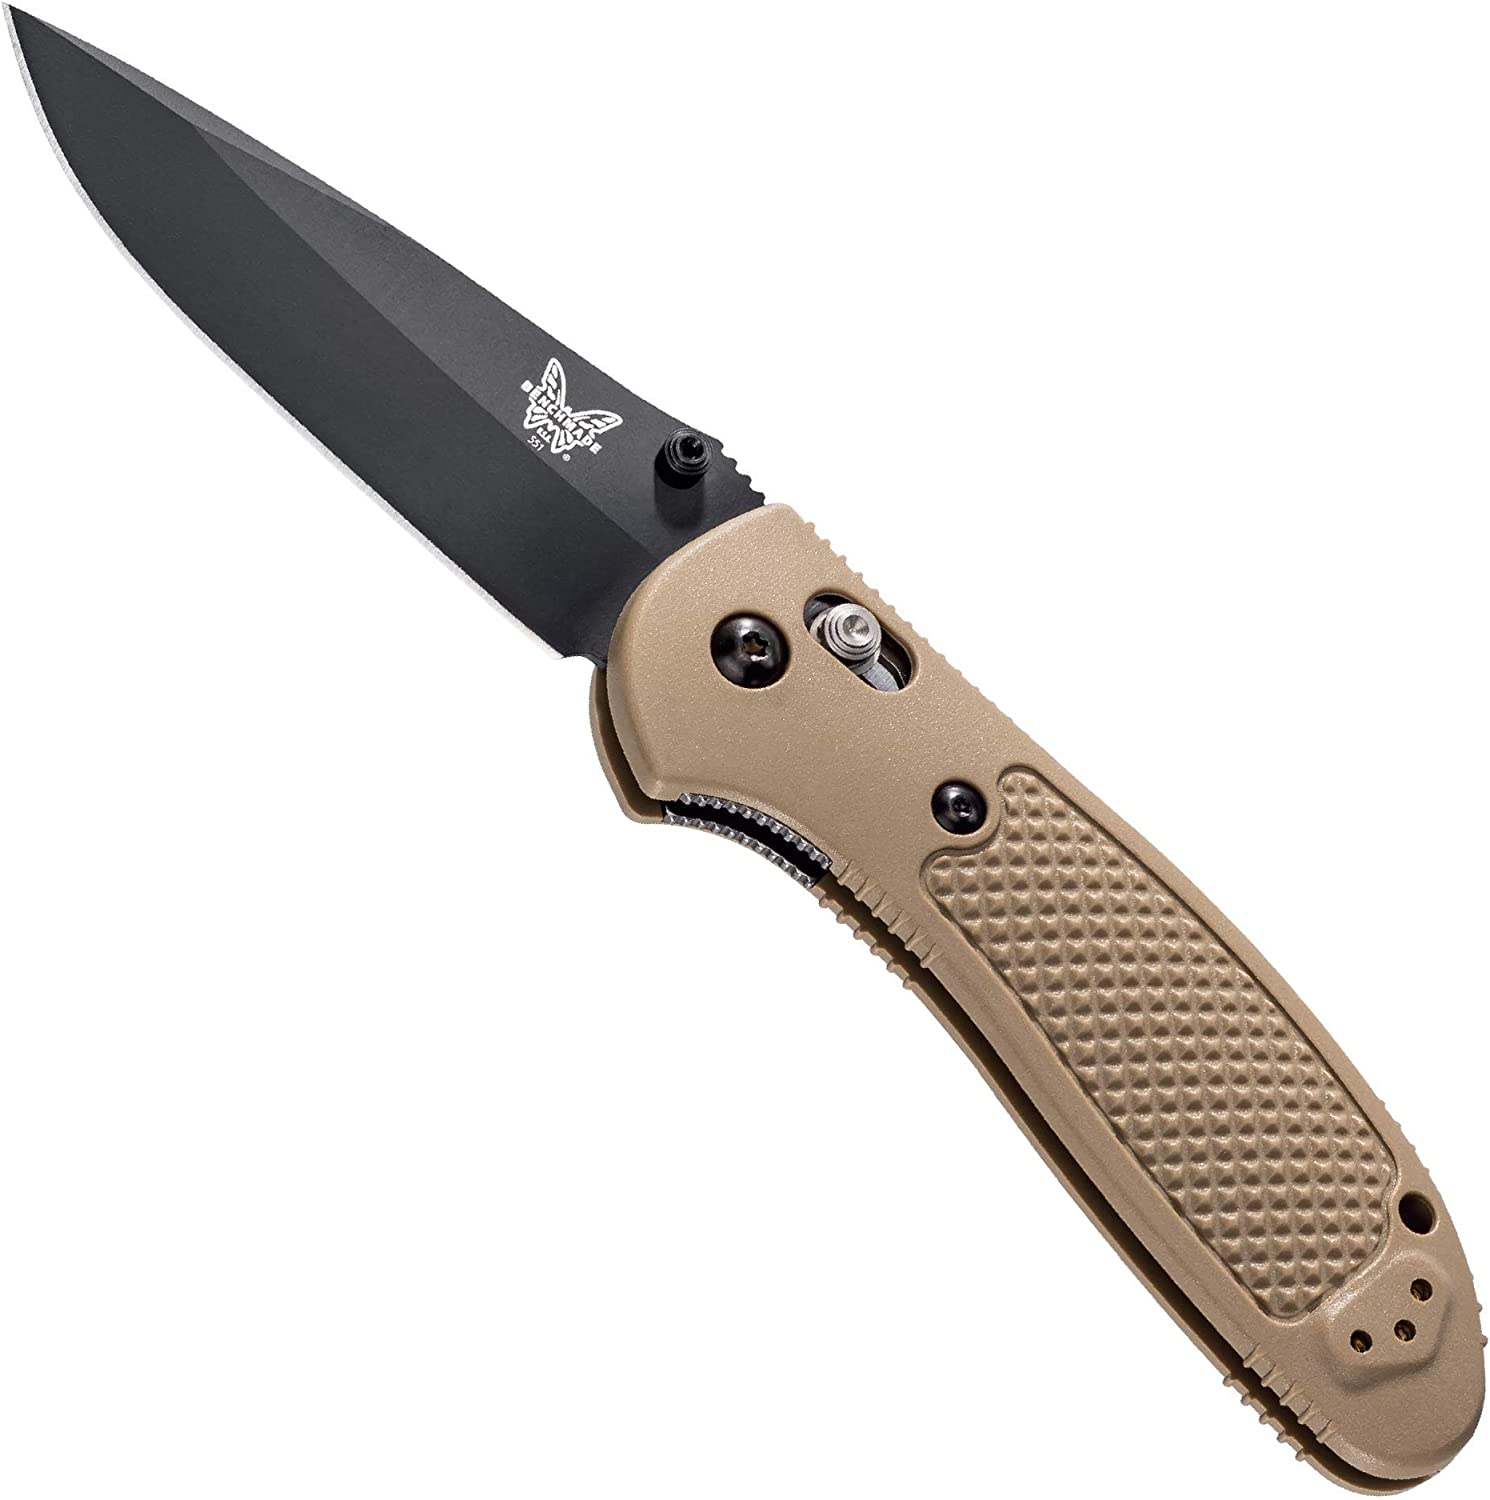 Benchmade – Griptilian 551 Knife with CPM-S30V Steel, Drop-Point Blade, Plain Edge, Coated Finish, Sand Handle, Coated Finish/Sand Handle